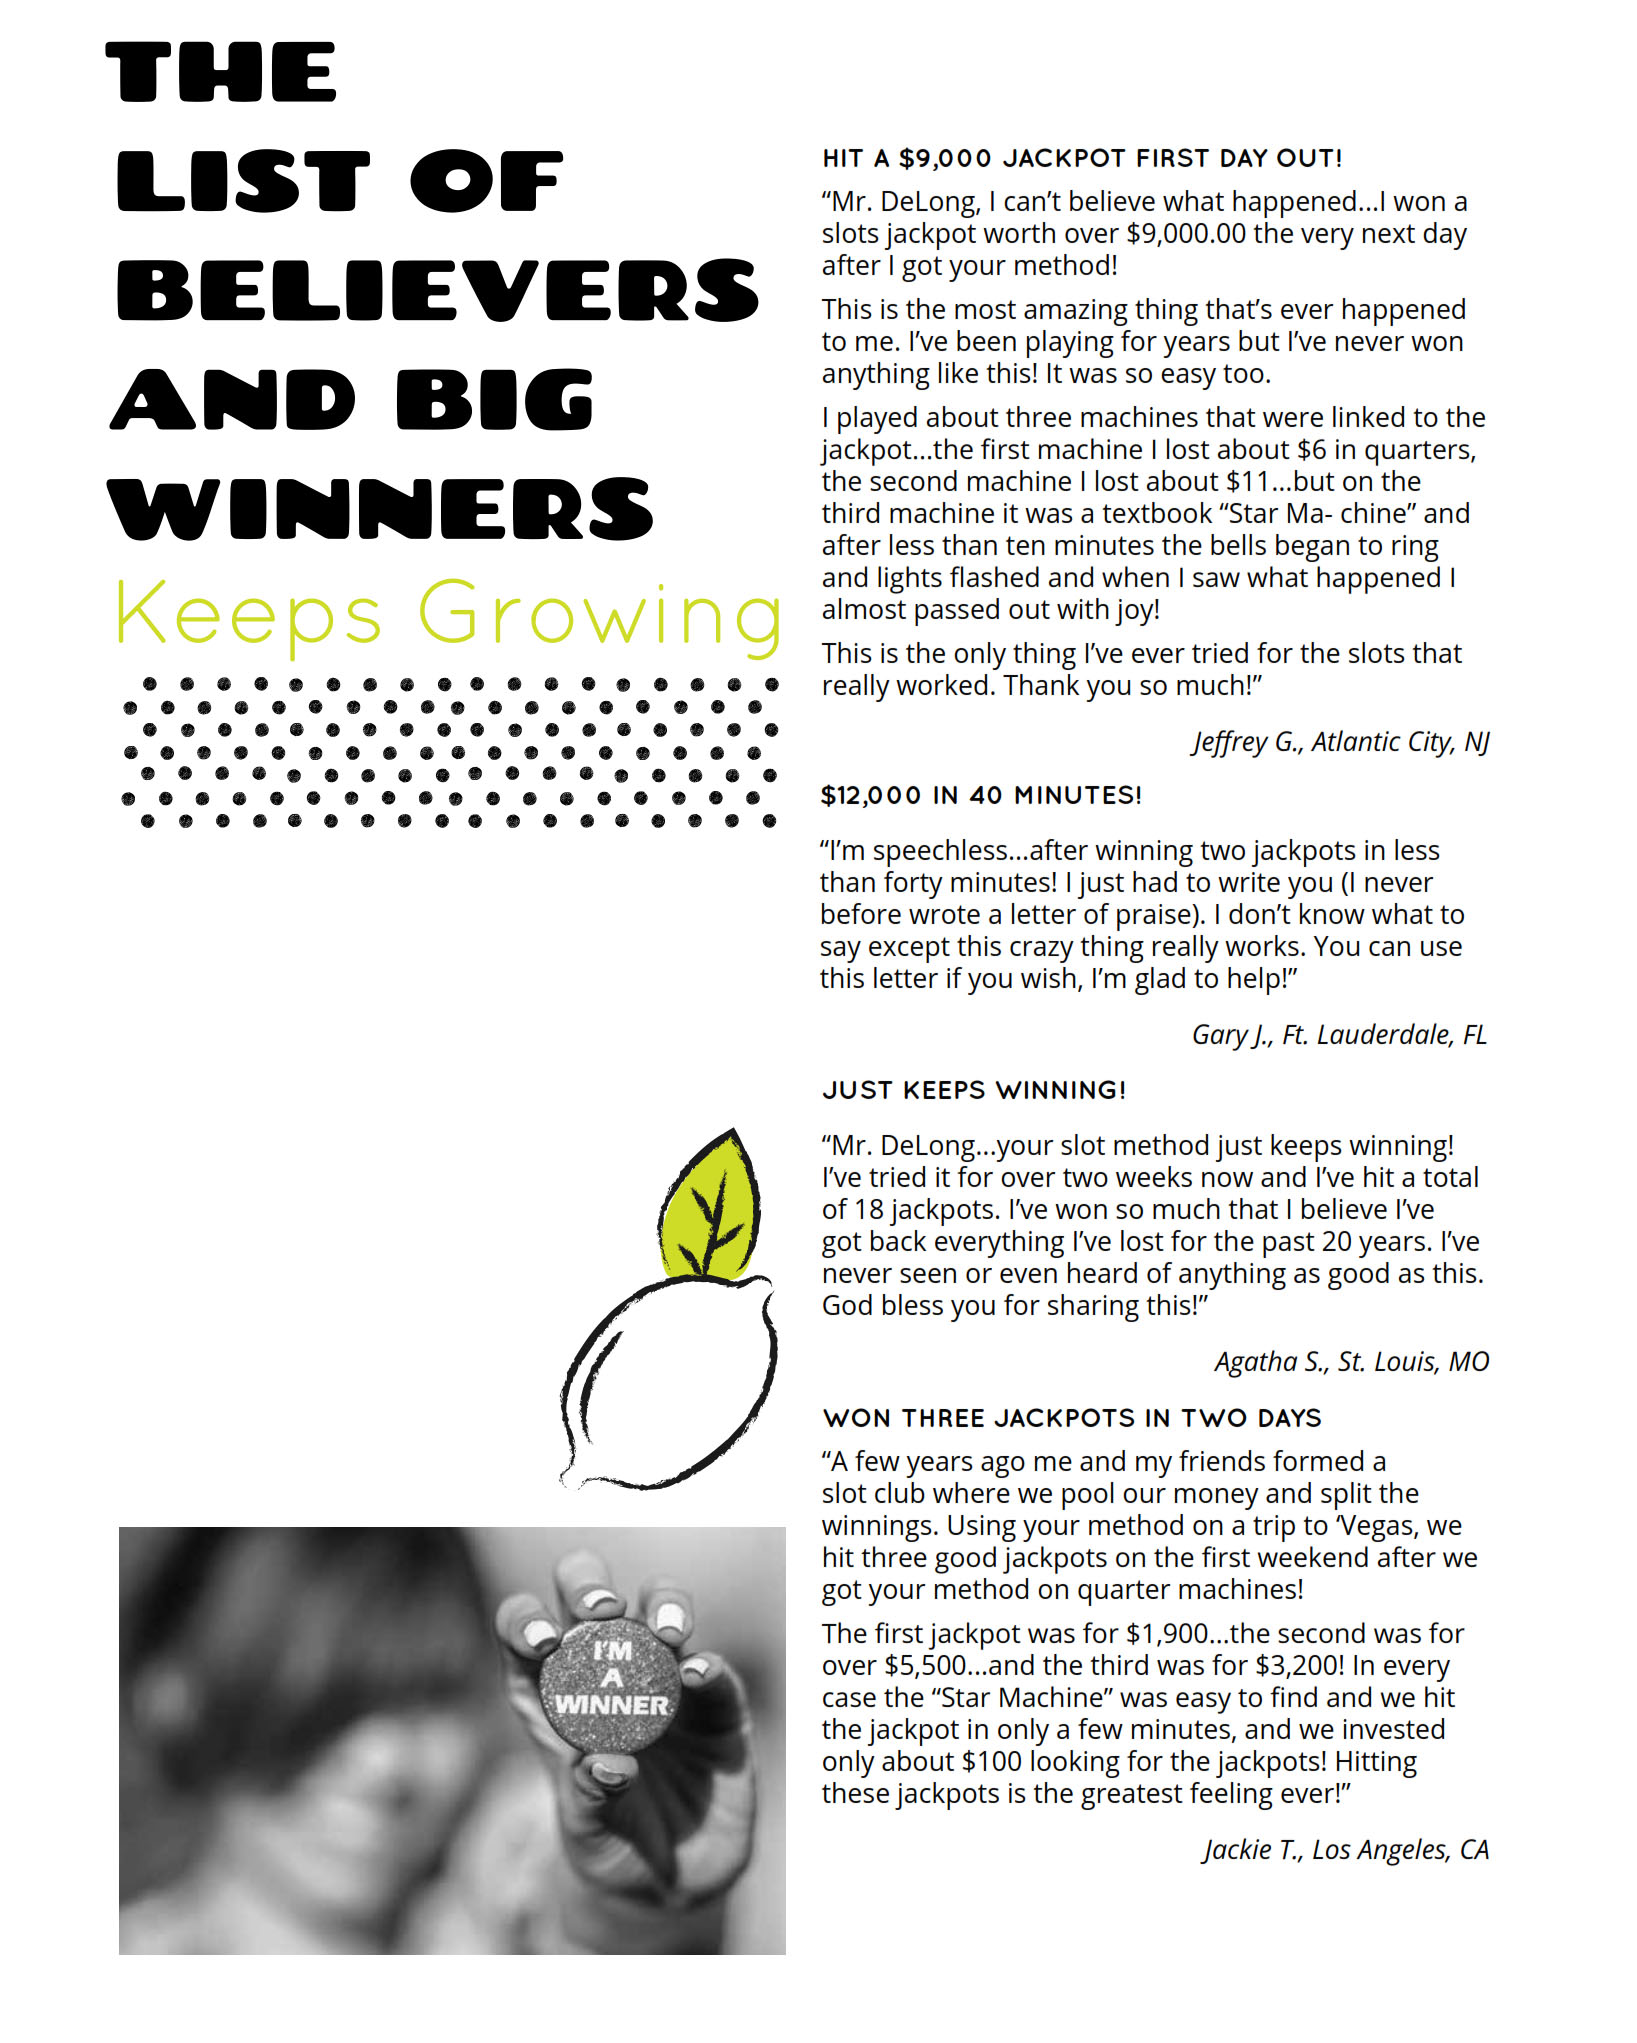 THE LIST OF BELIEVERS AND BIG WINNERS